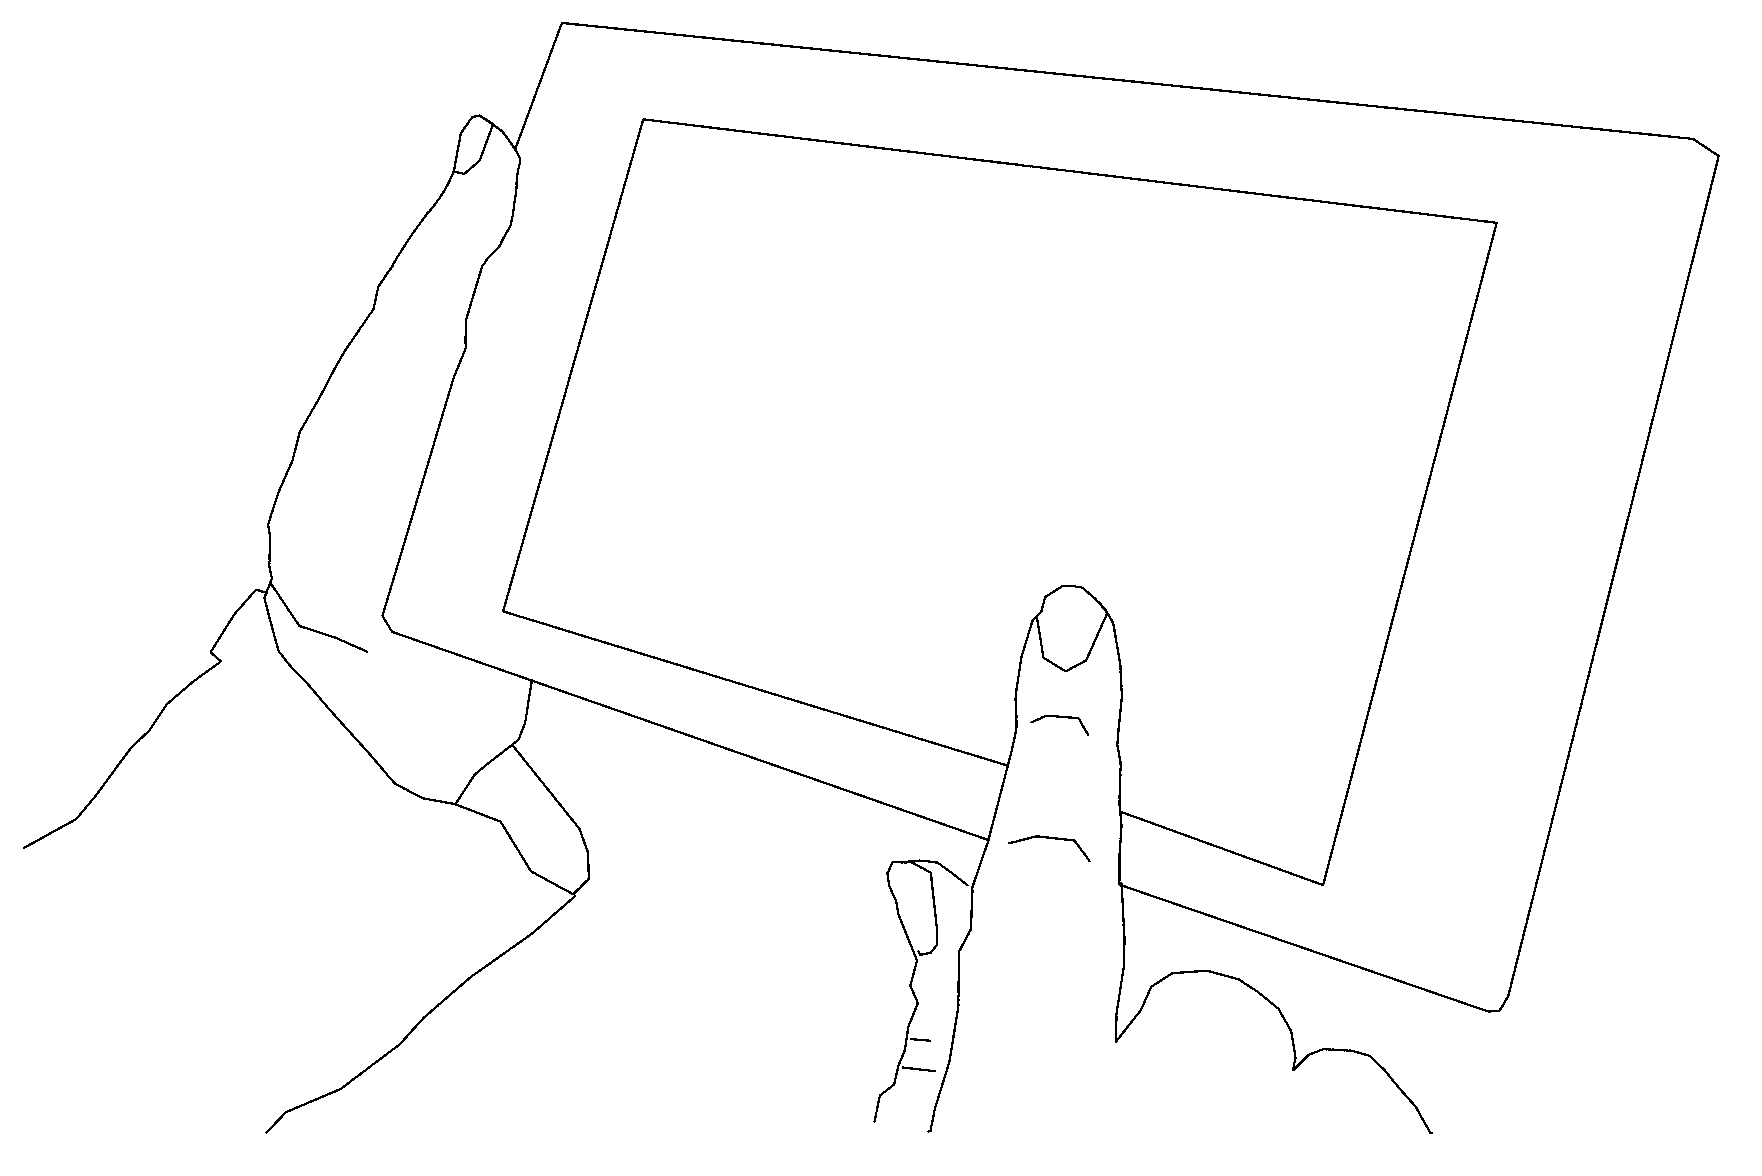 Game controlling method for use in touch panel medium and game medium